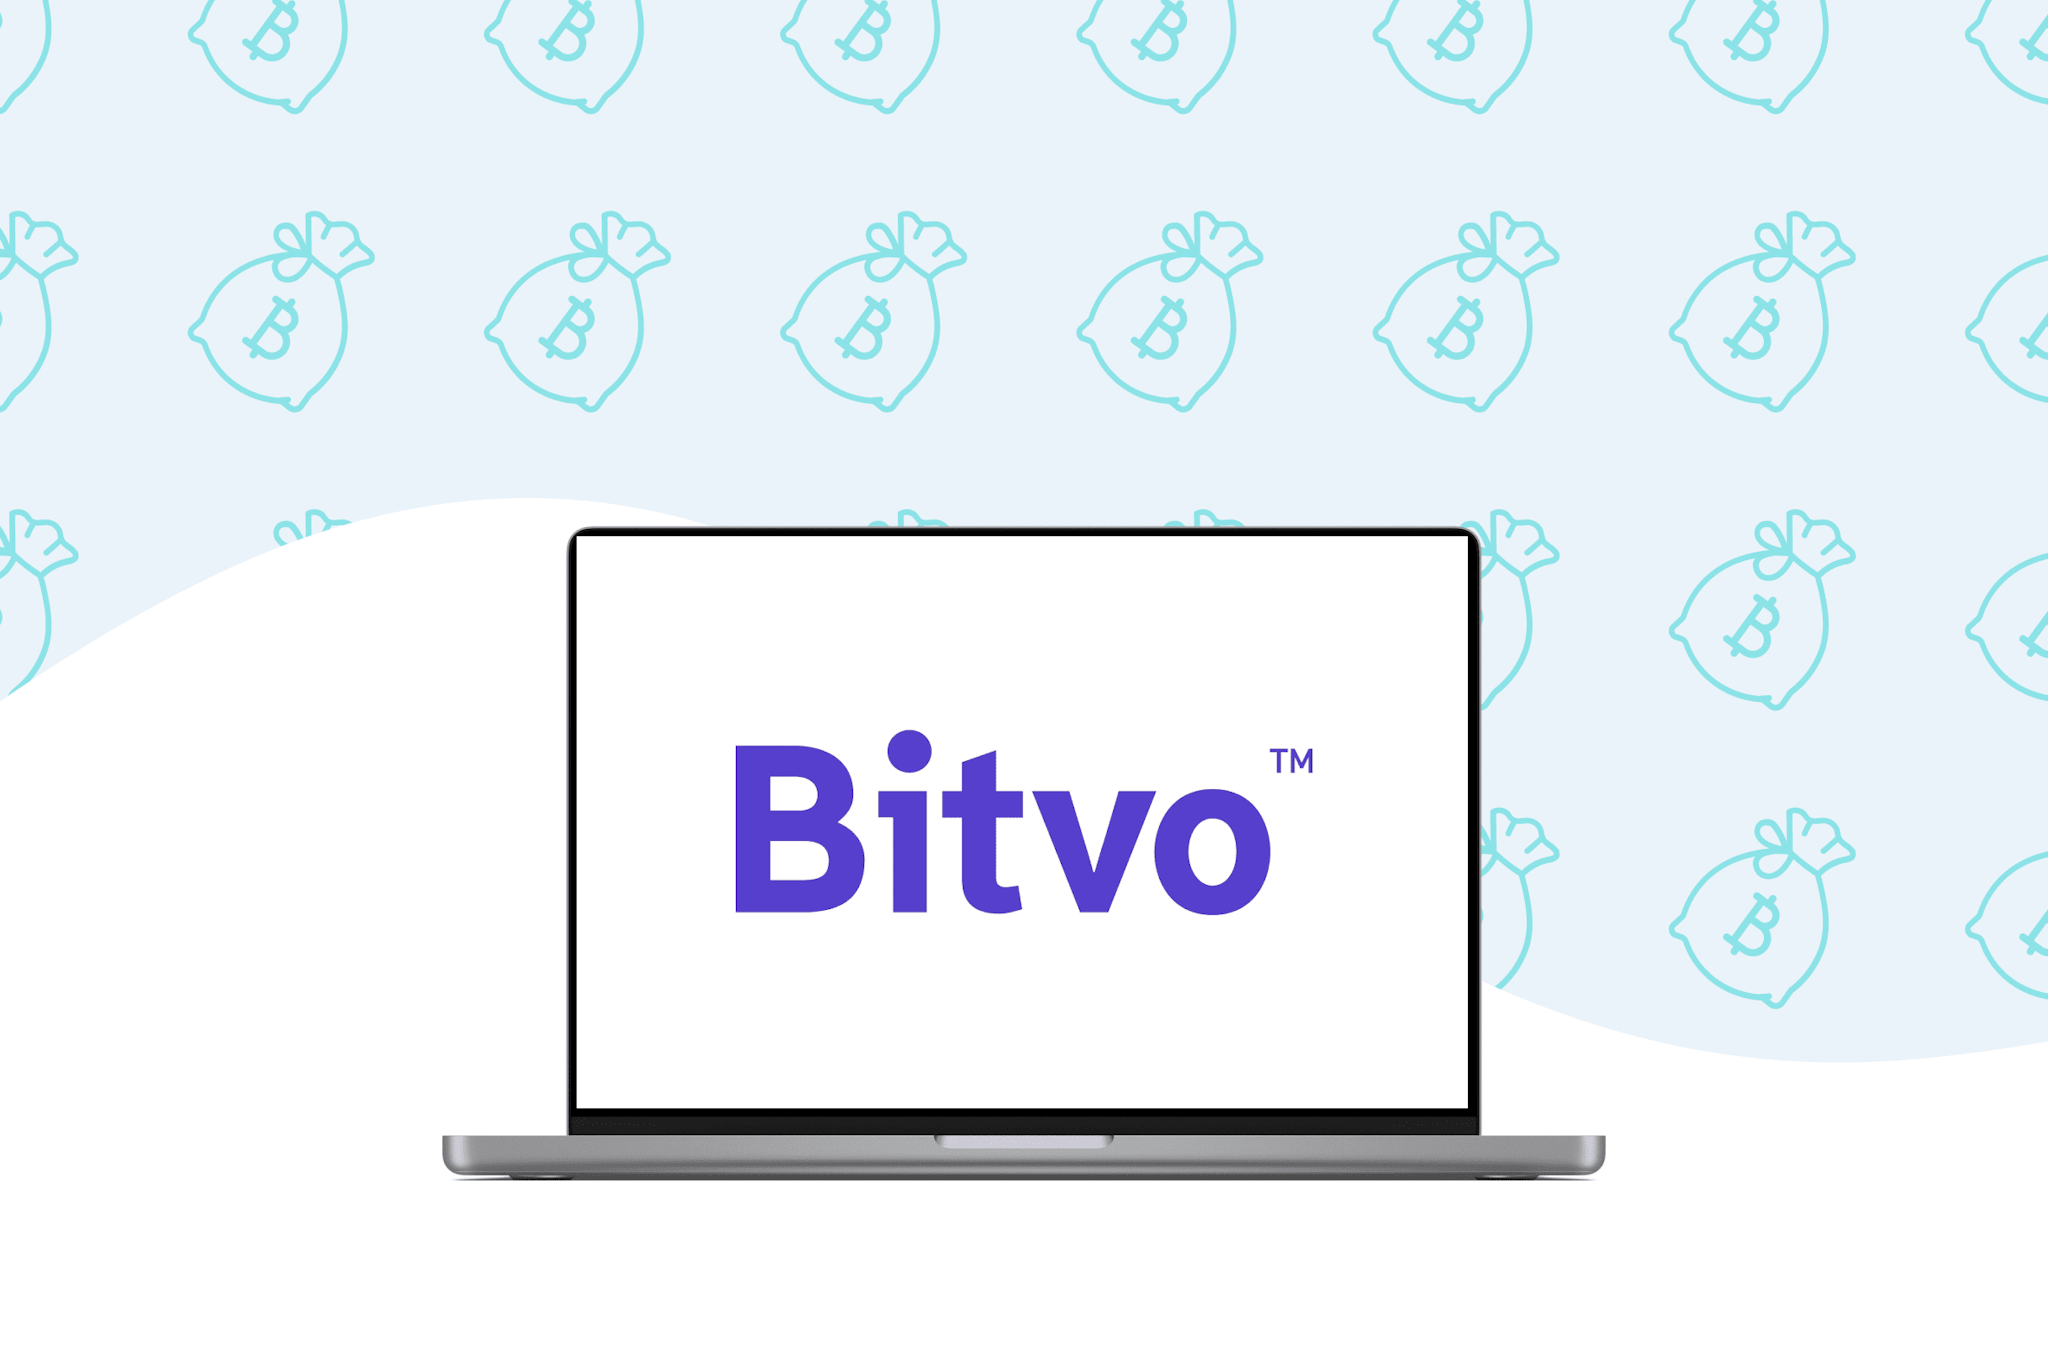 Buy and sell bitcoin, ethereum, litecoin, and more on Bitvo's cryptocurrency exchange.